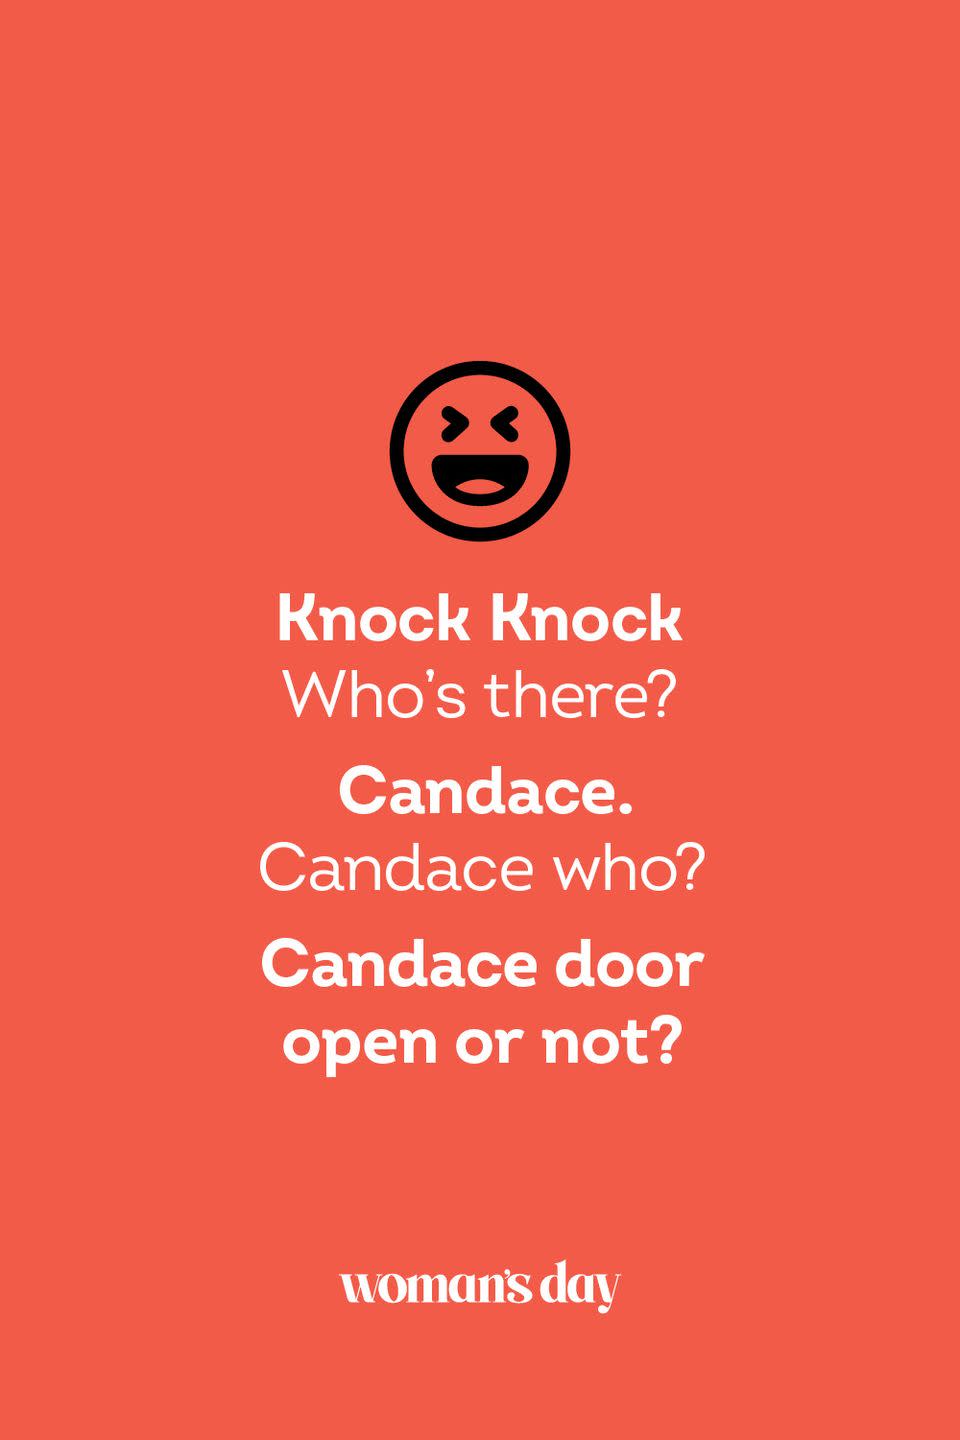 <p><strong>Knock Knock</strong></p><p><em>Who’s there? </em></p><p><strong>Candace.</strong></p><p><em>Candace who?</em></p><p><strong>Candace door open or not?</strong></p>